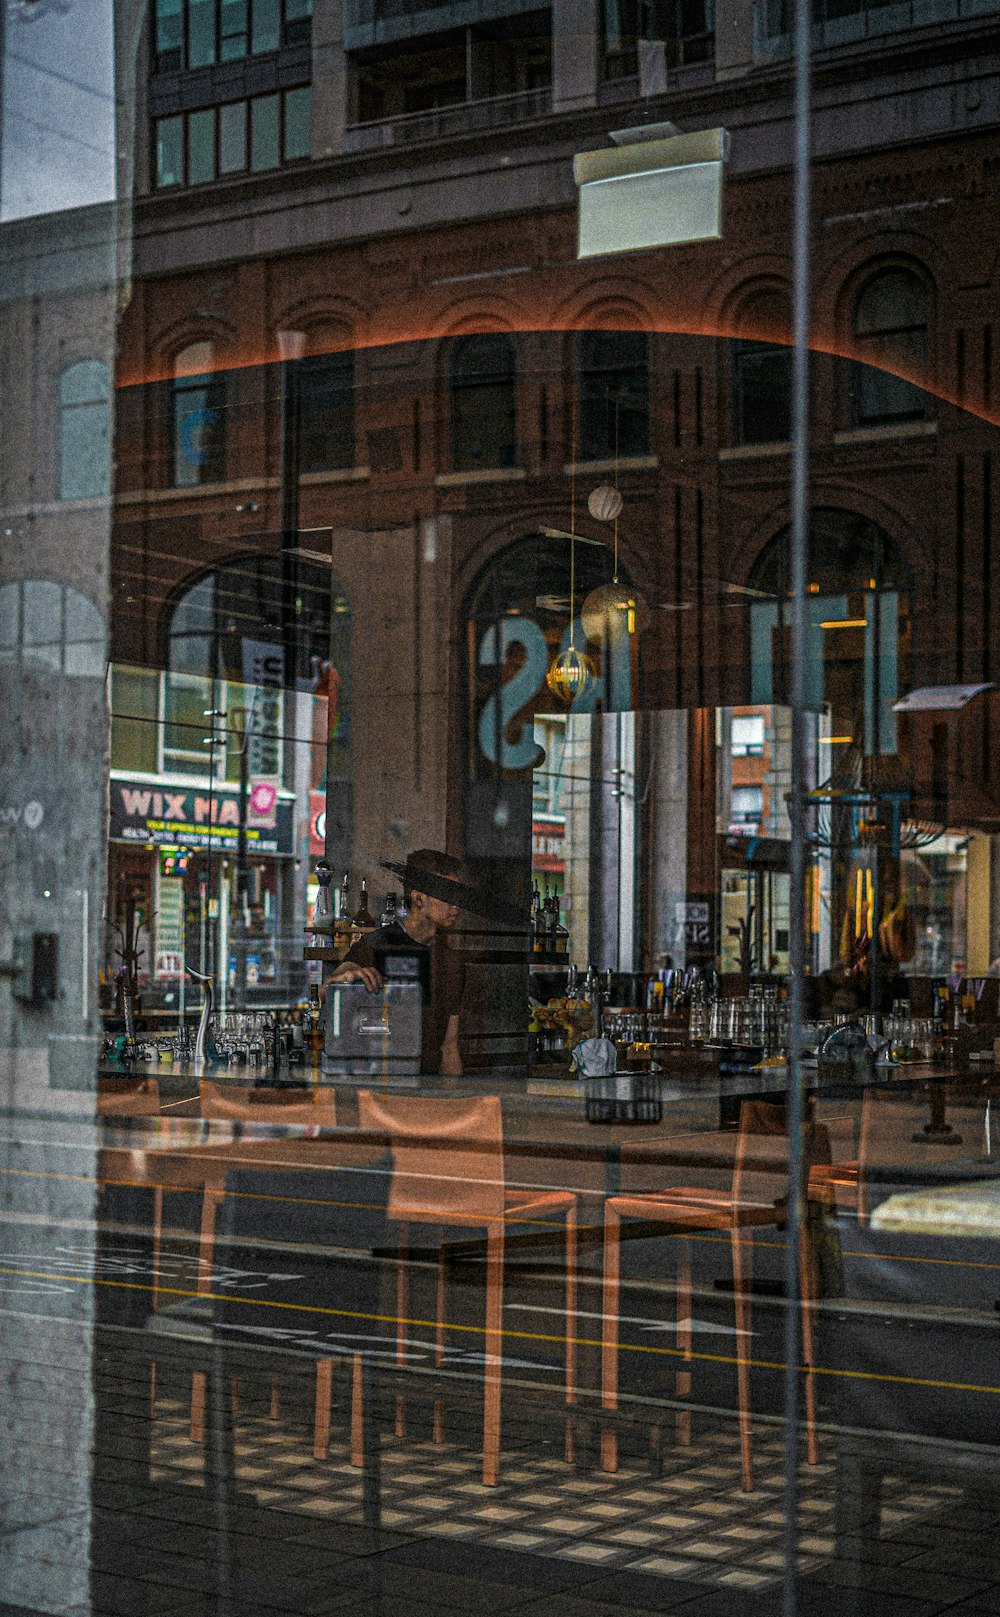 a reflection of a restaurant in a window